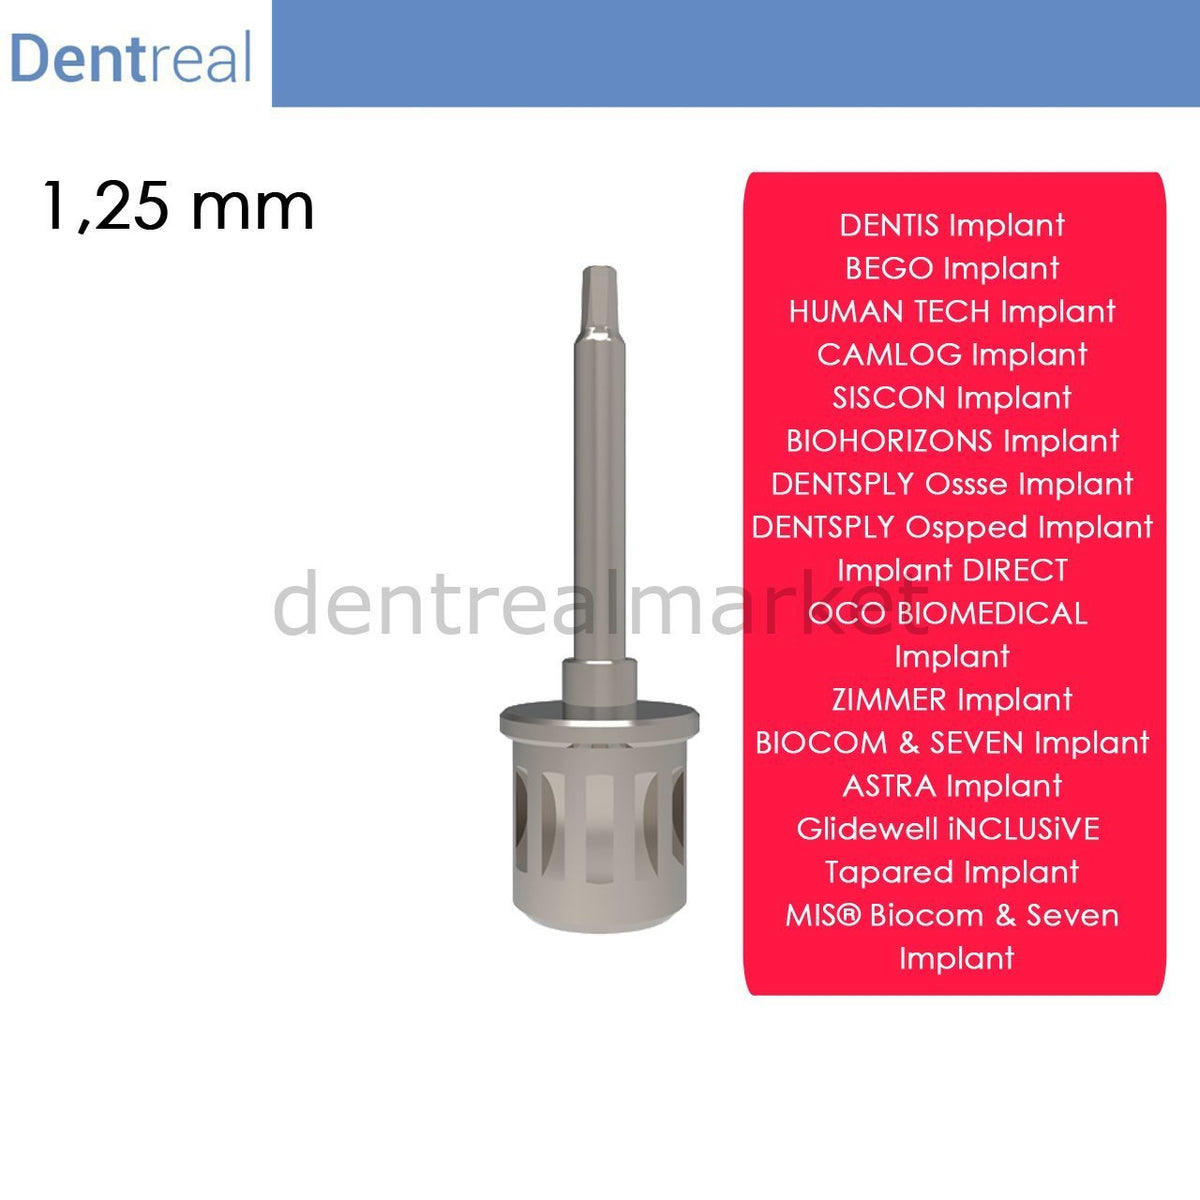 DentrealStore - Dentreal Screwdriver for Siscon Implant - 1,25 mm Hex Driver